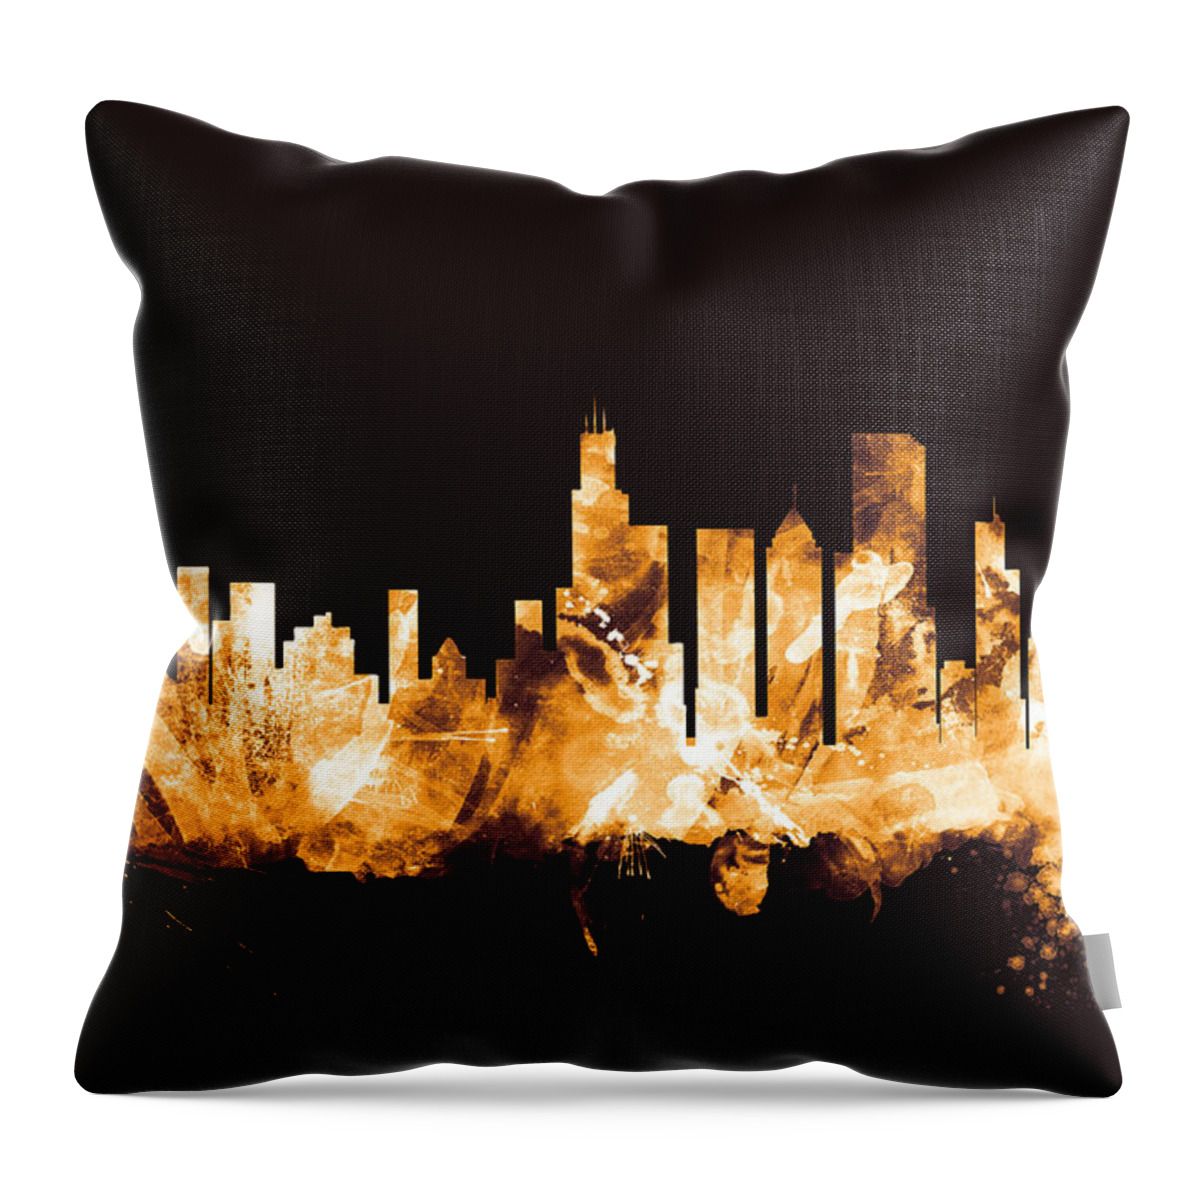 Chicago Throw Pillow featuring the digital art Chicago Illinois Skyline #11 by Michael Tompsett